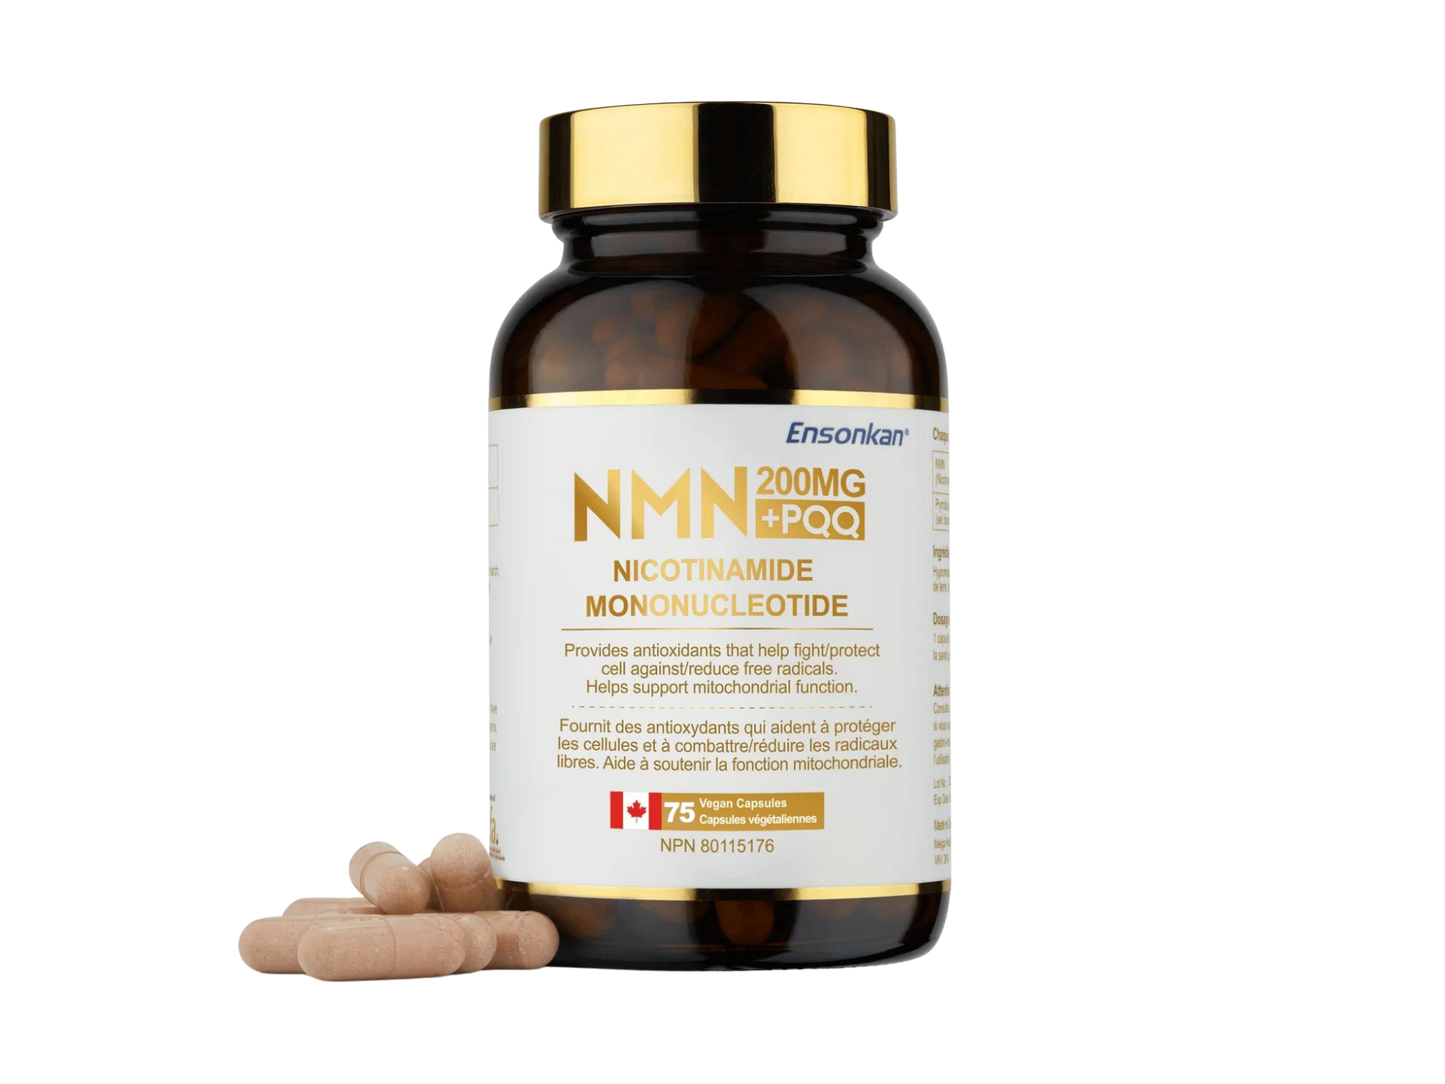 Ensonkan NMN 200mg + PQQ 20mg Capsule - 1 Bottle (Mother's Day Special: 75 Capsules)